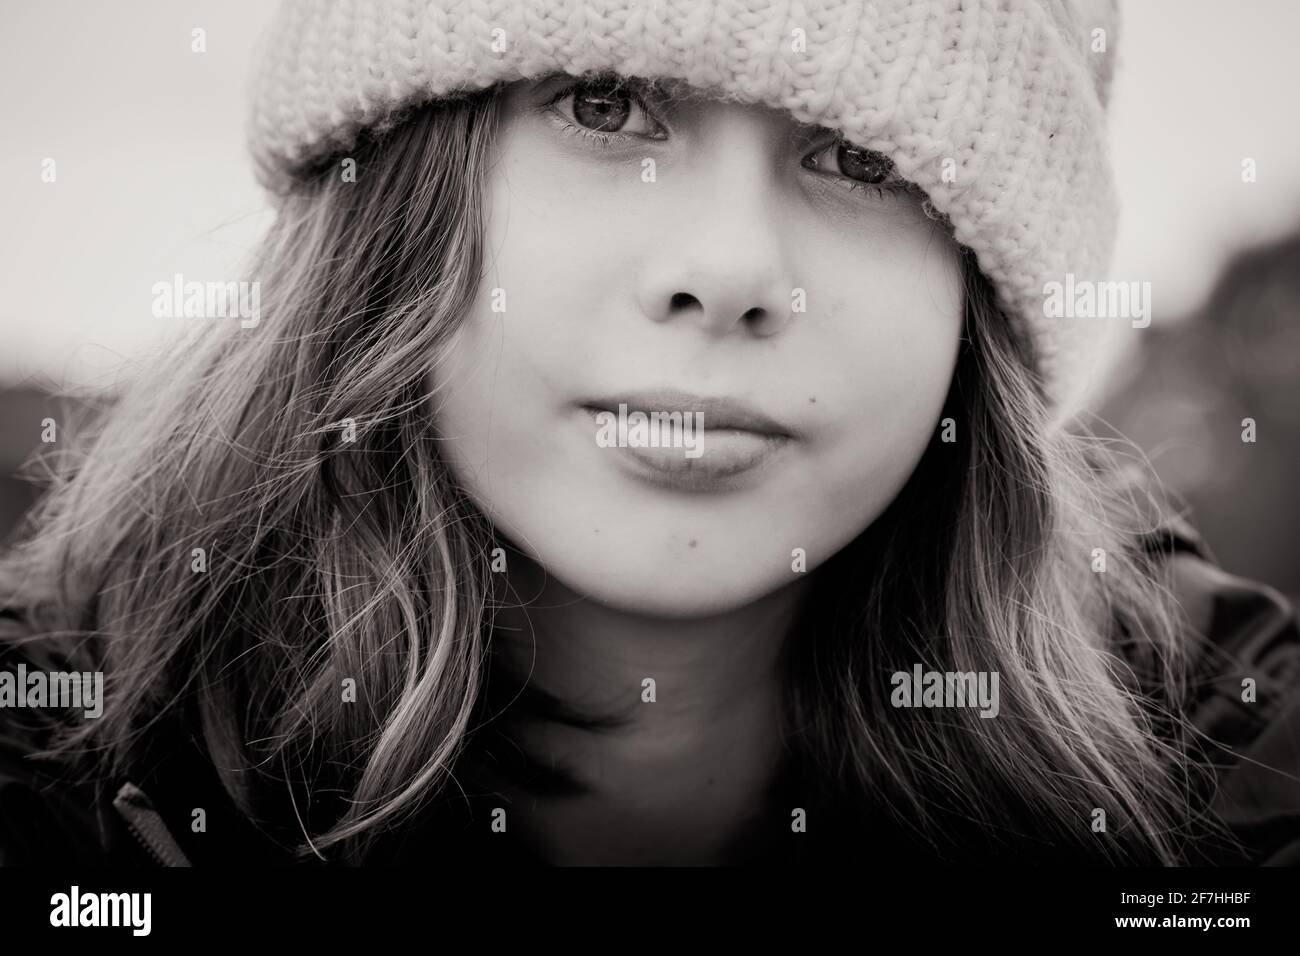 A beautiful tween girl model outside in winter in a knitted beanie hat Stock Photo